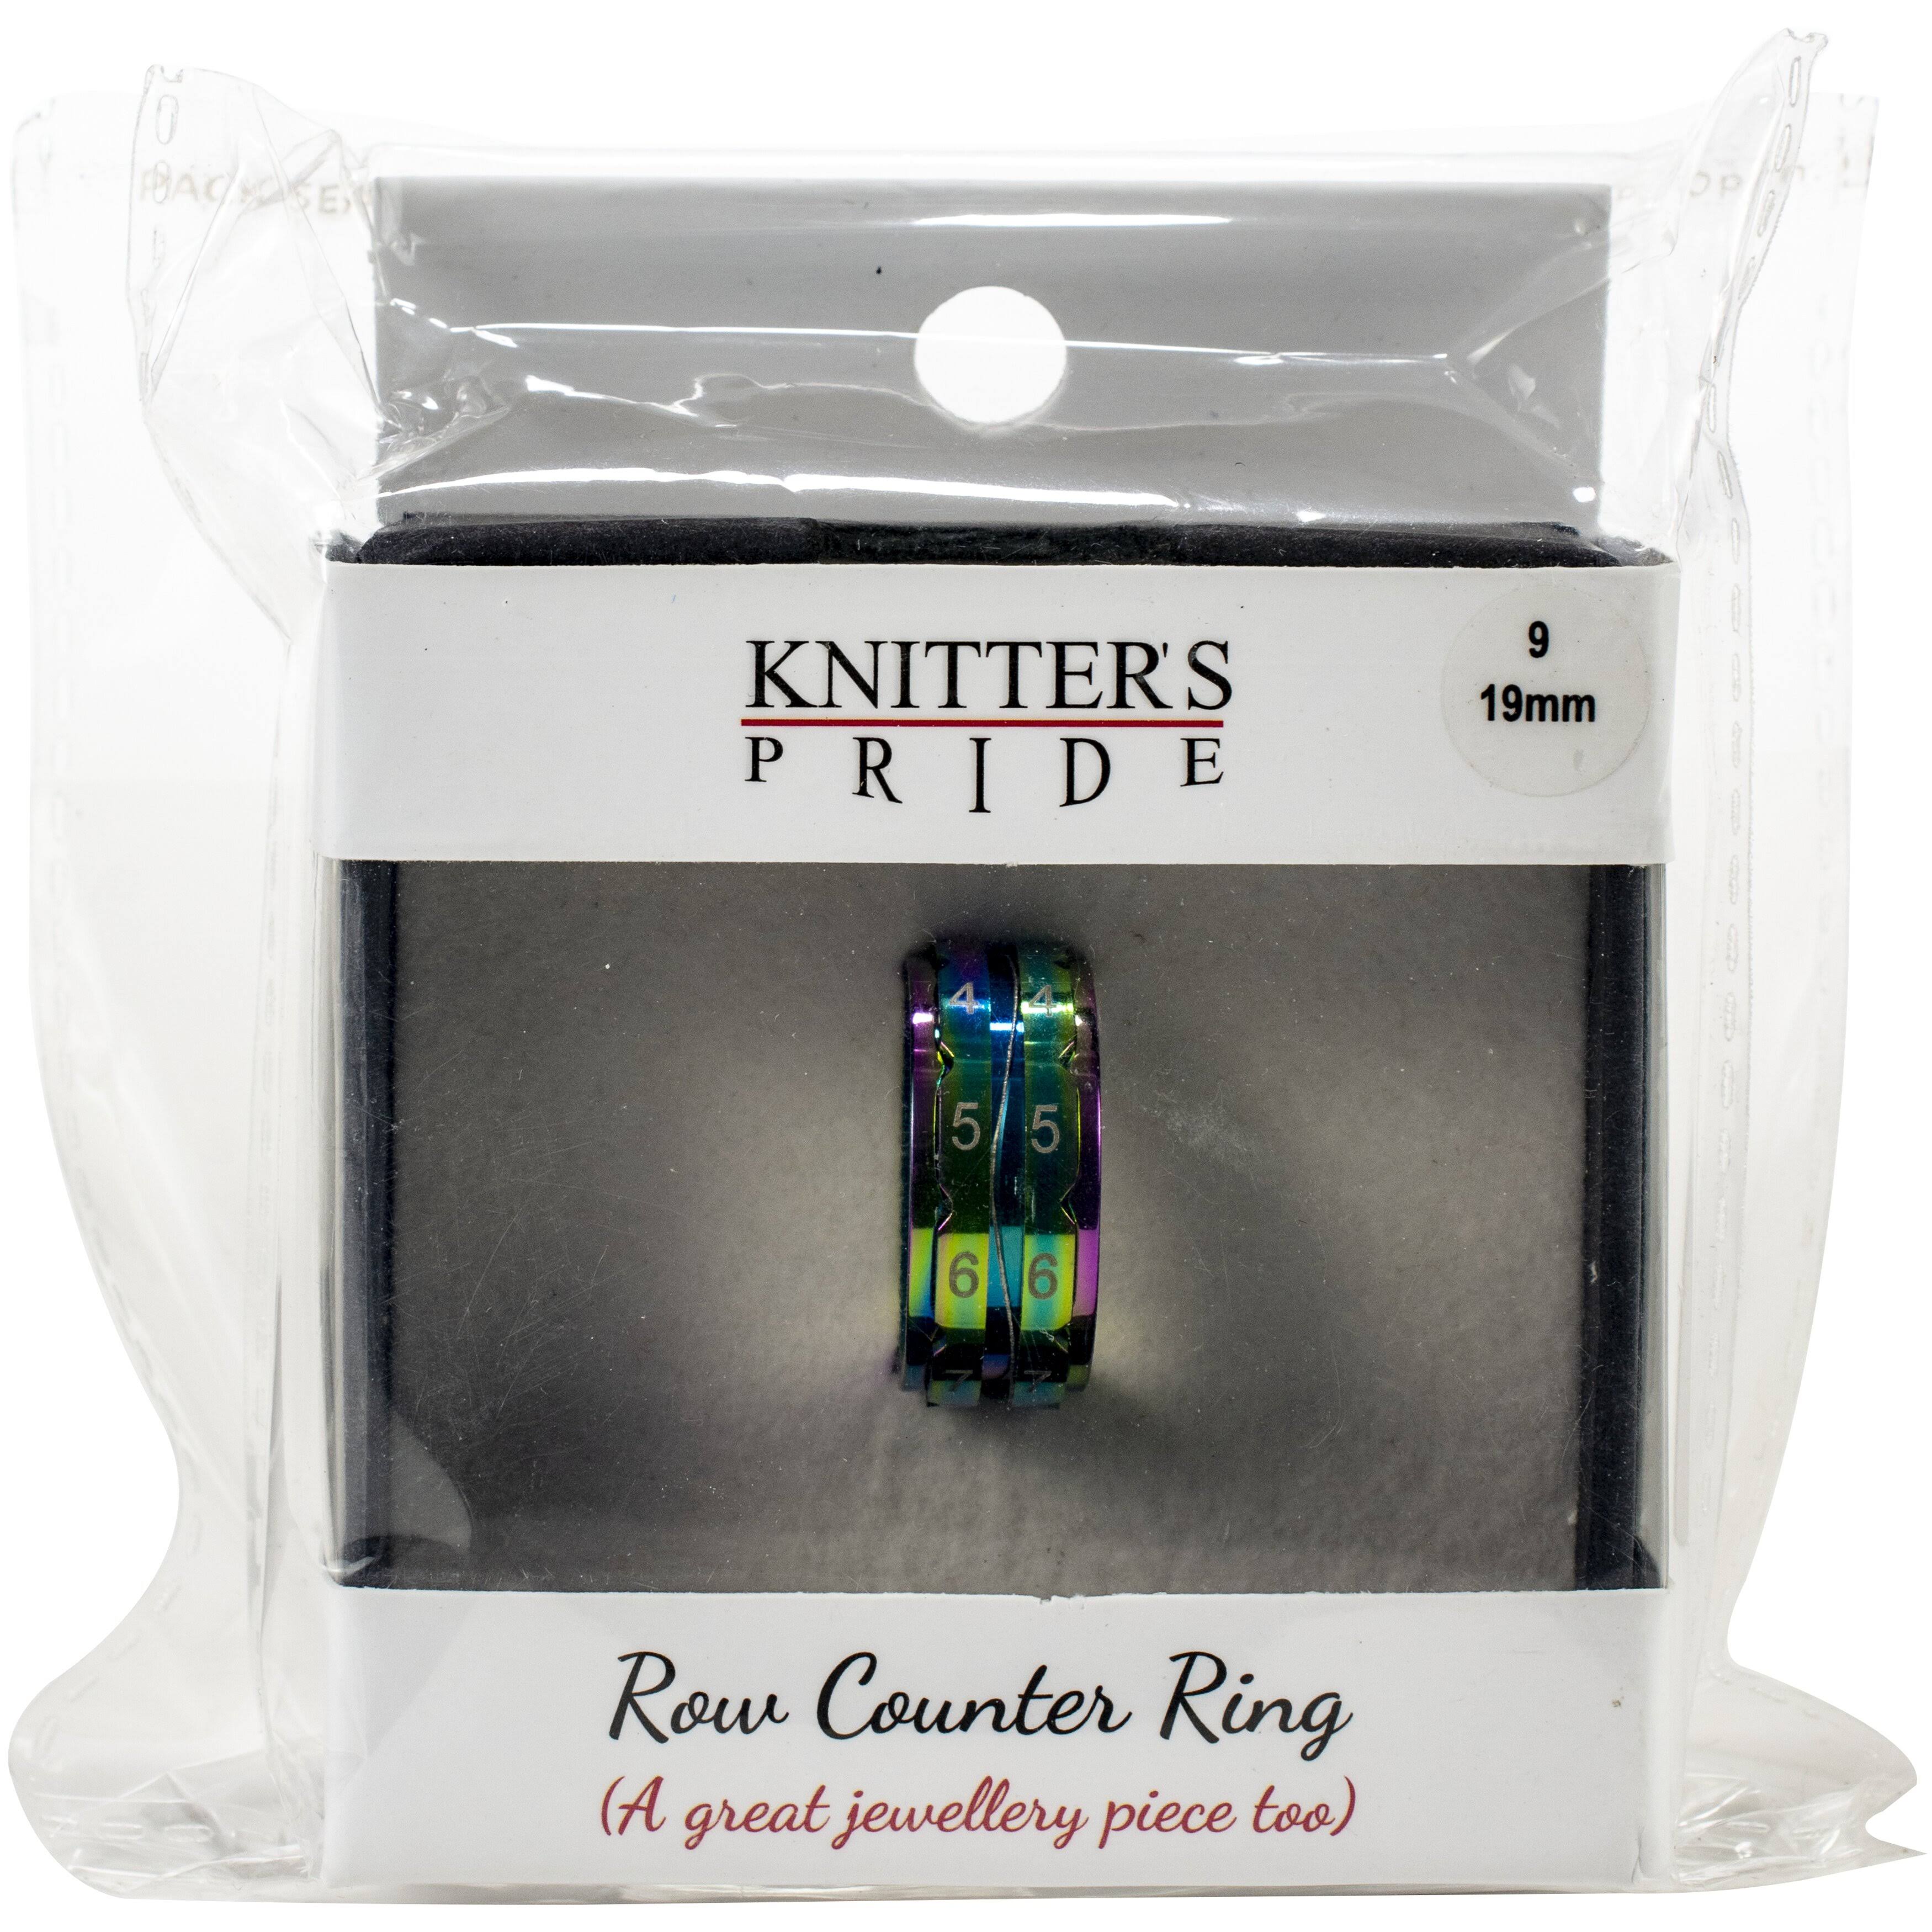 Knitter's Pride Rainbow Row Counter Ring-size 9: 19.0mm Diameter